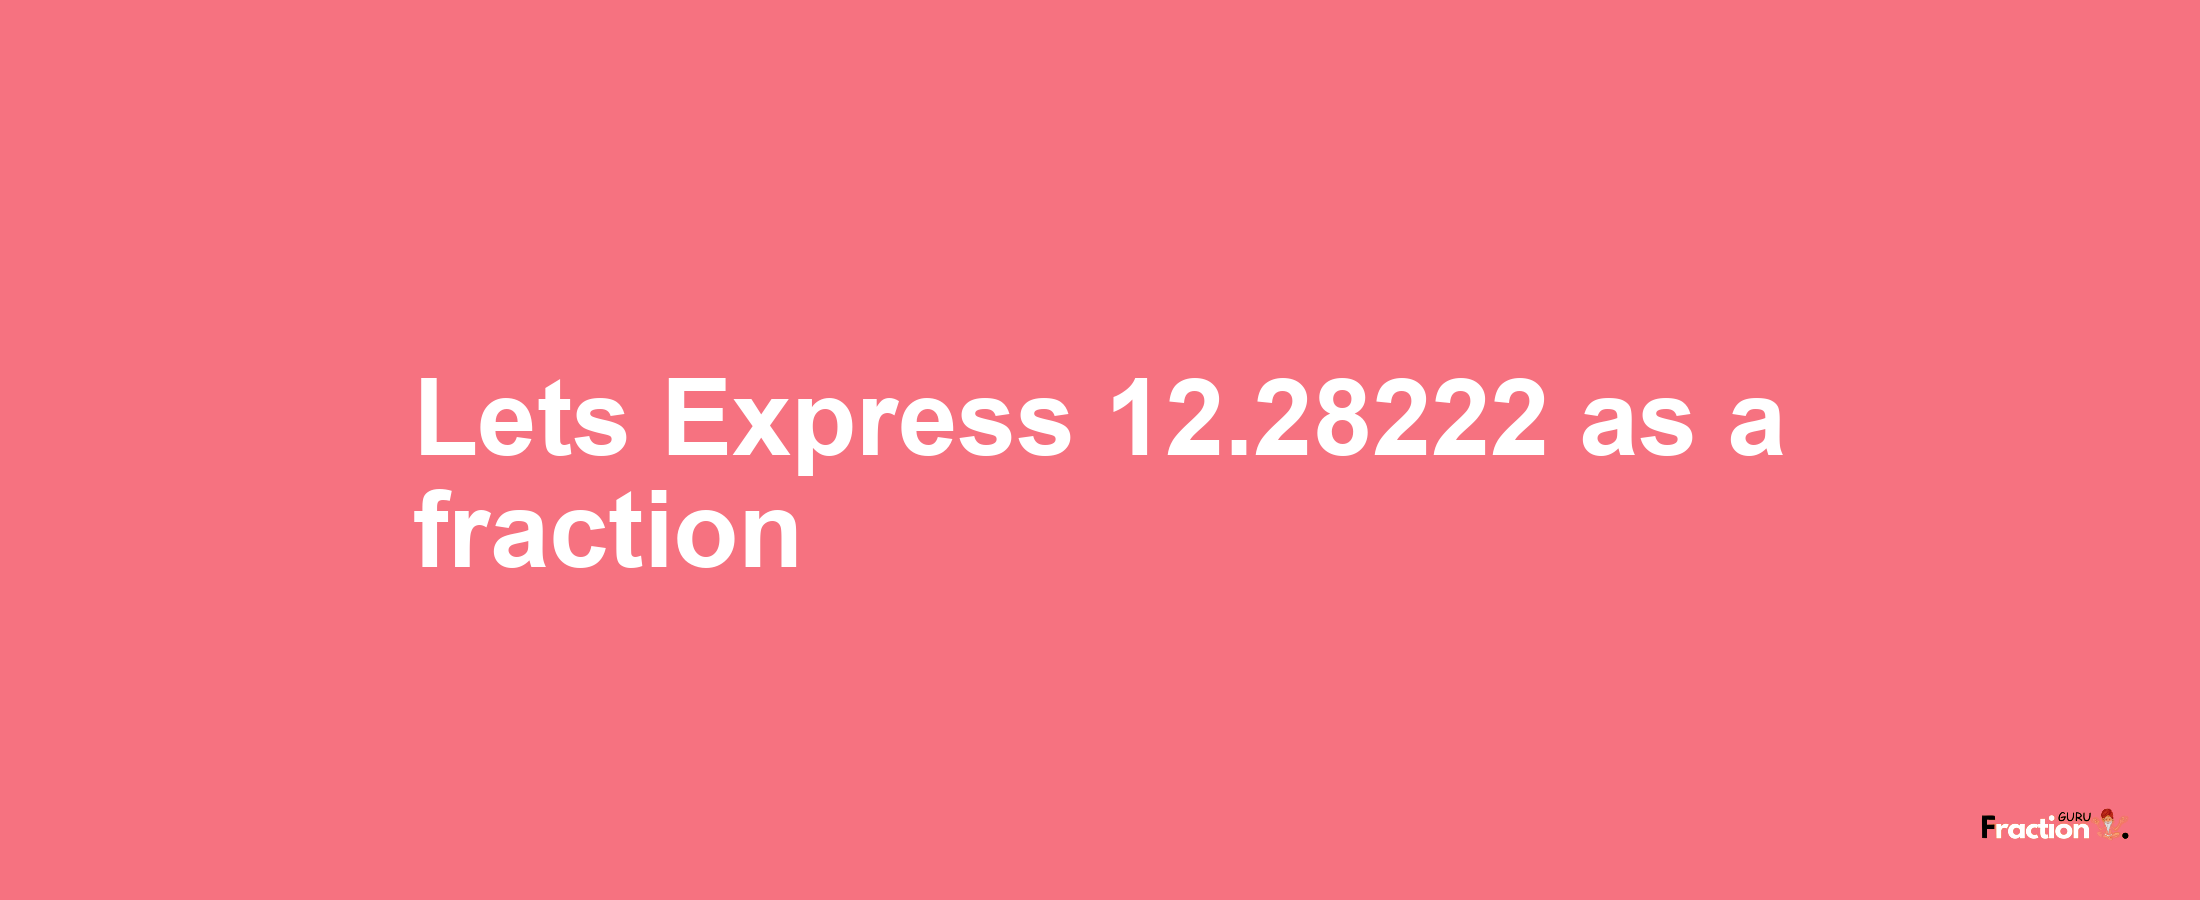 Lets Express 12.28222 as afraction